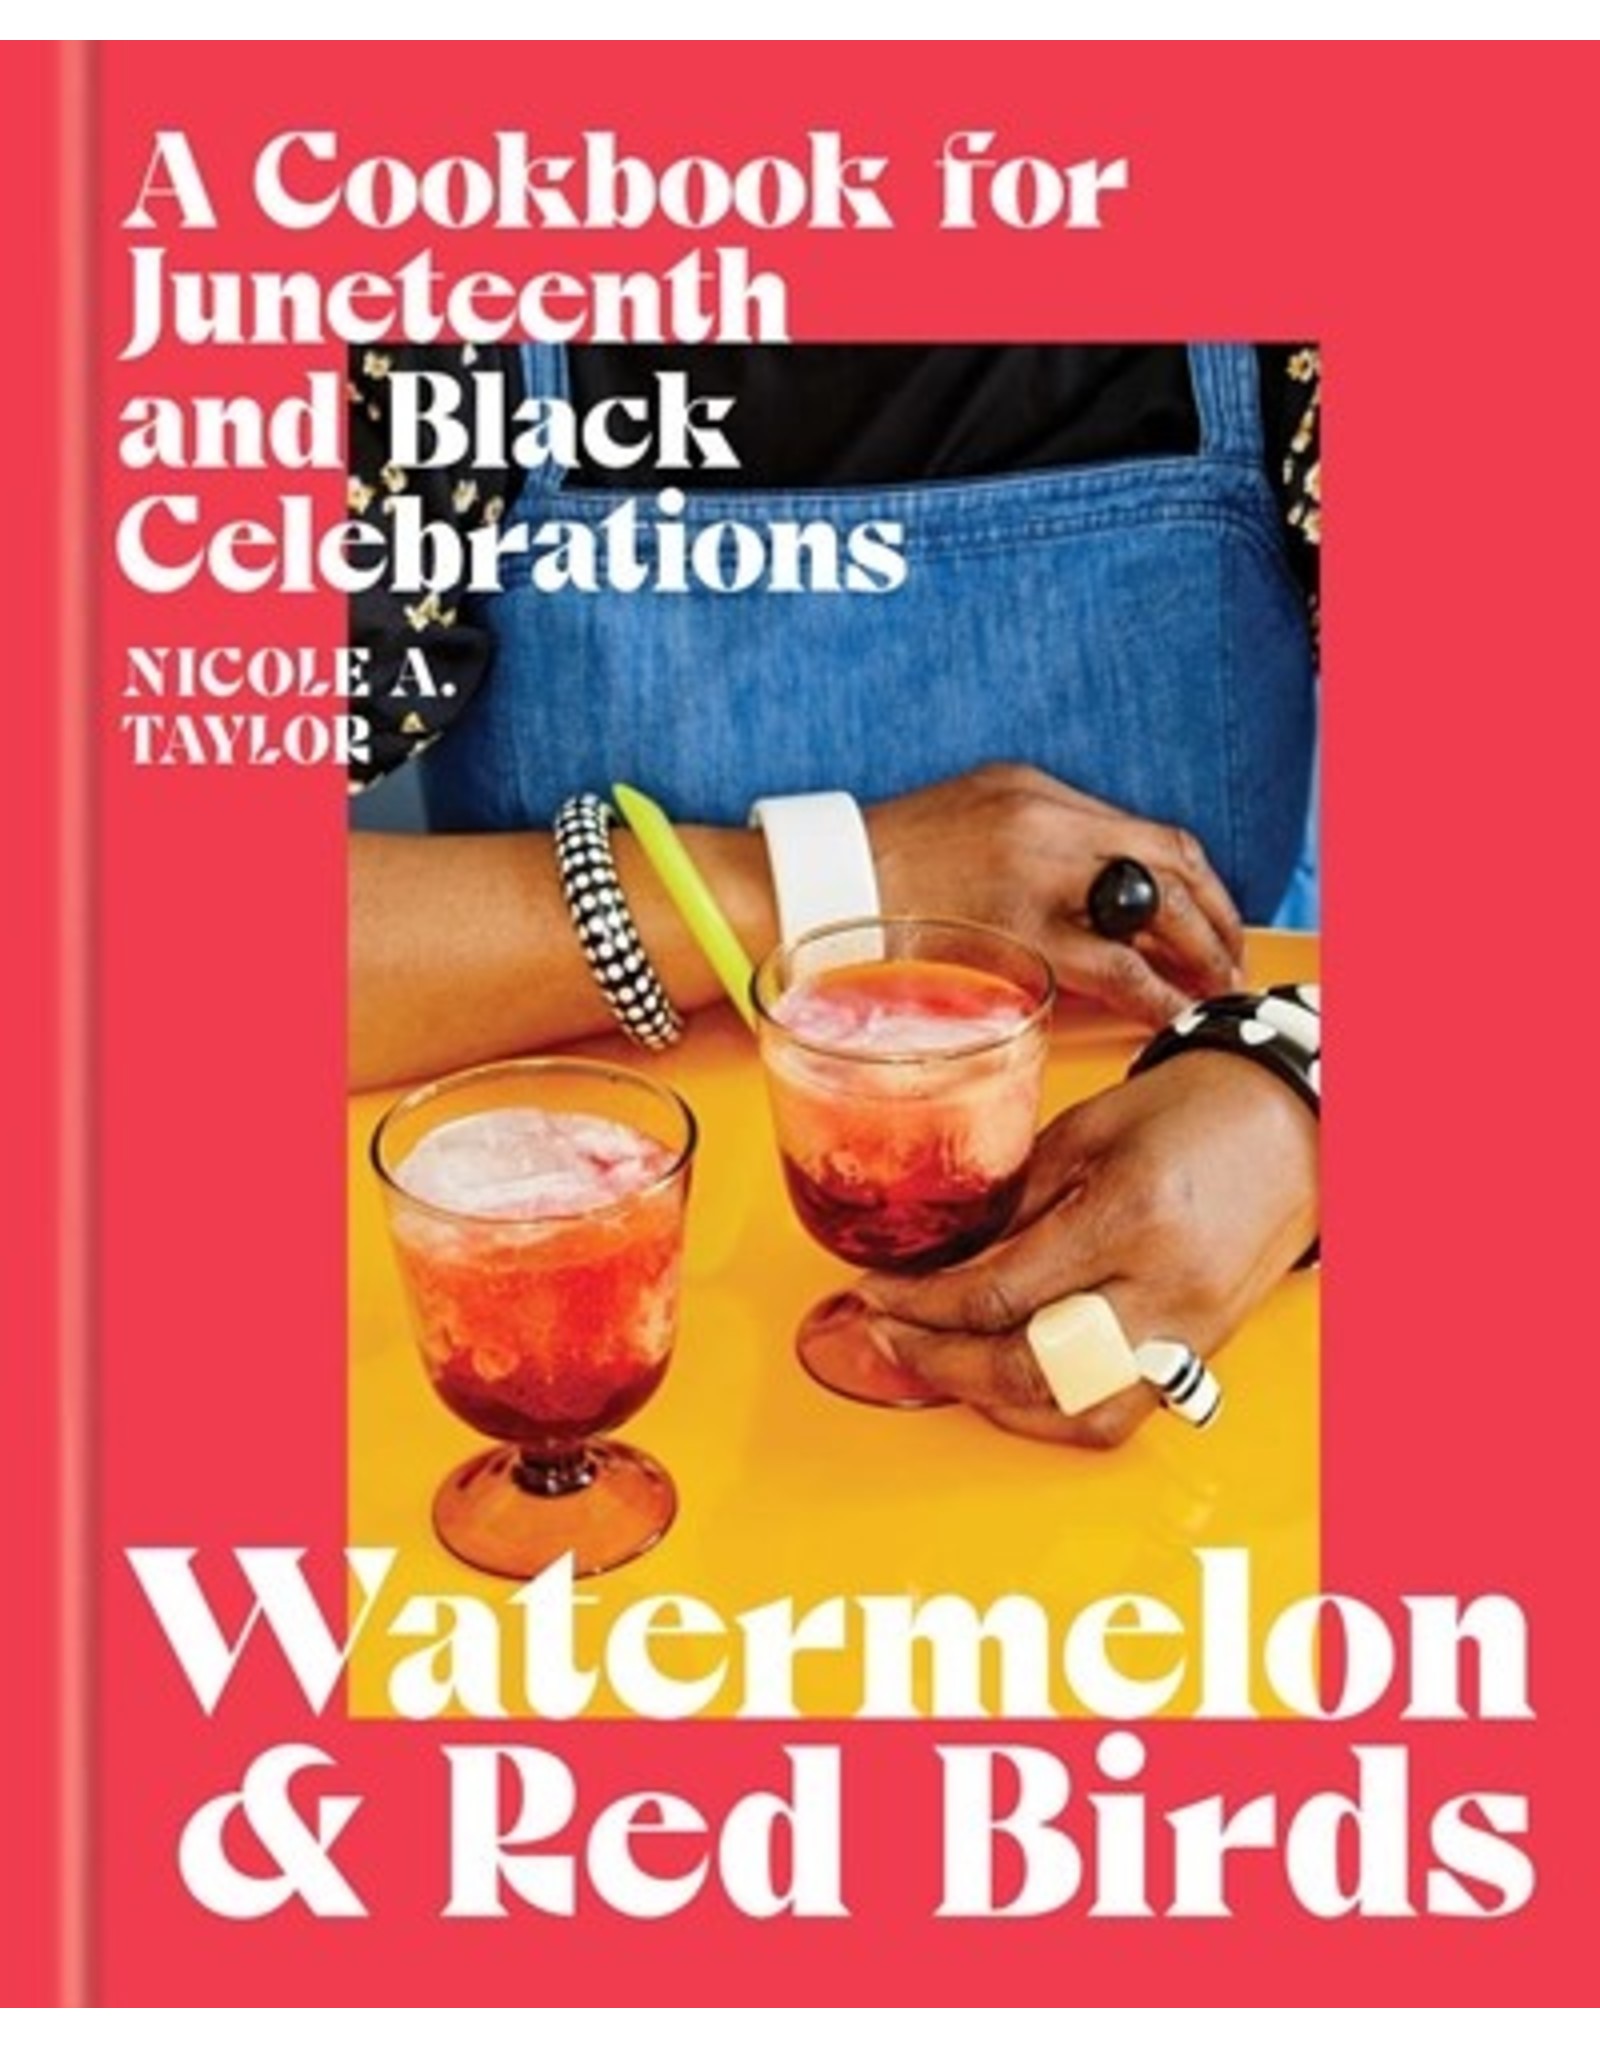 Books Watermelon and Red Birds : A Cookbook for Juneteenth and Black Celebrations by Nicole A. Taylor (Black Friday)